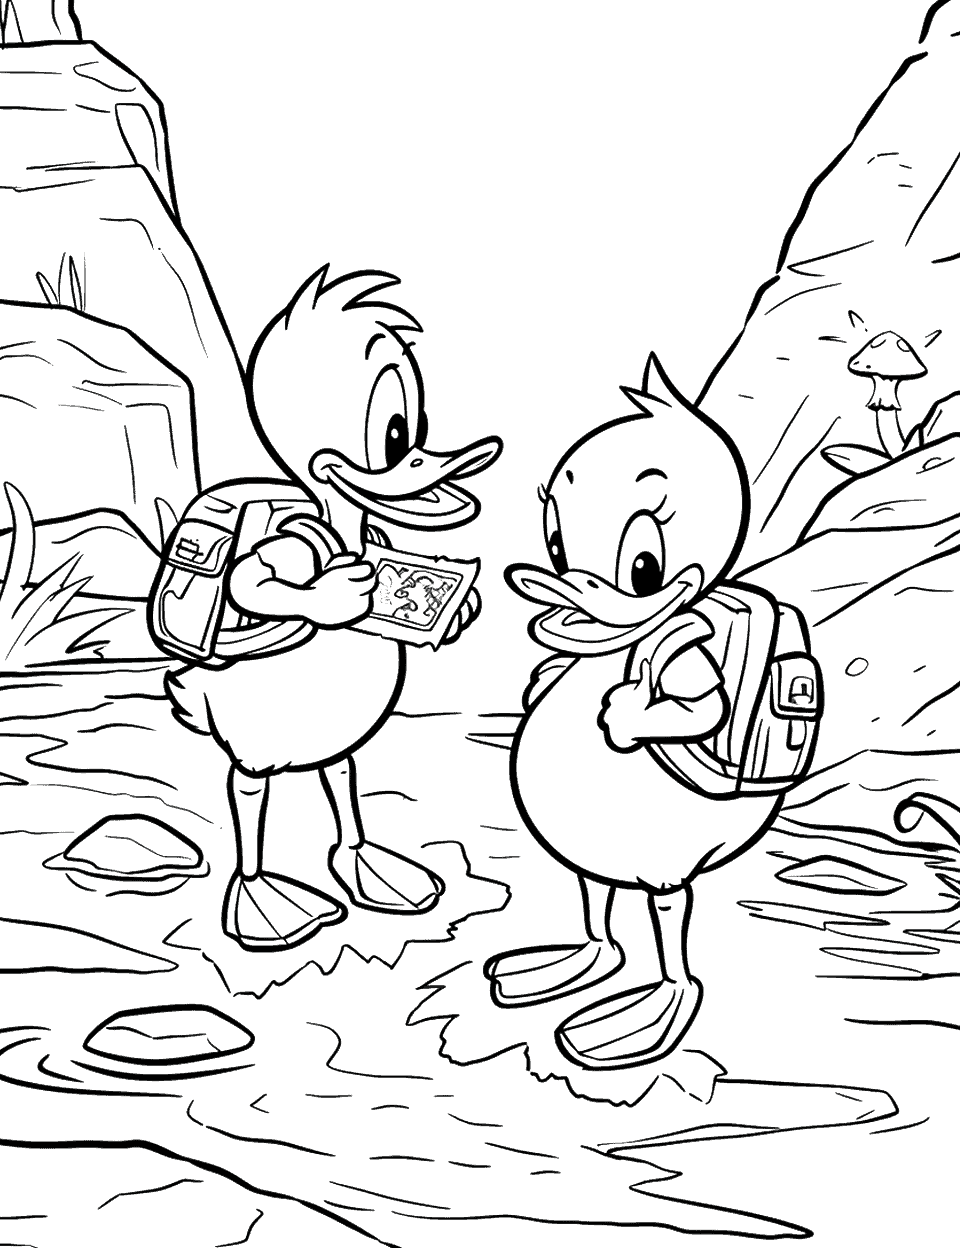 DuckTales Adventure Scene Coloring Page - The DuckTales crew embarking on a treasure hunt, with a map and backpacks.